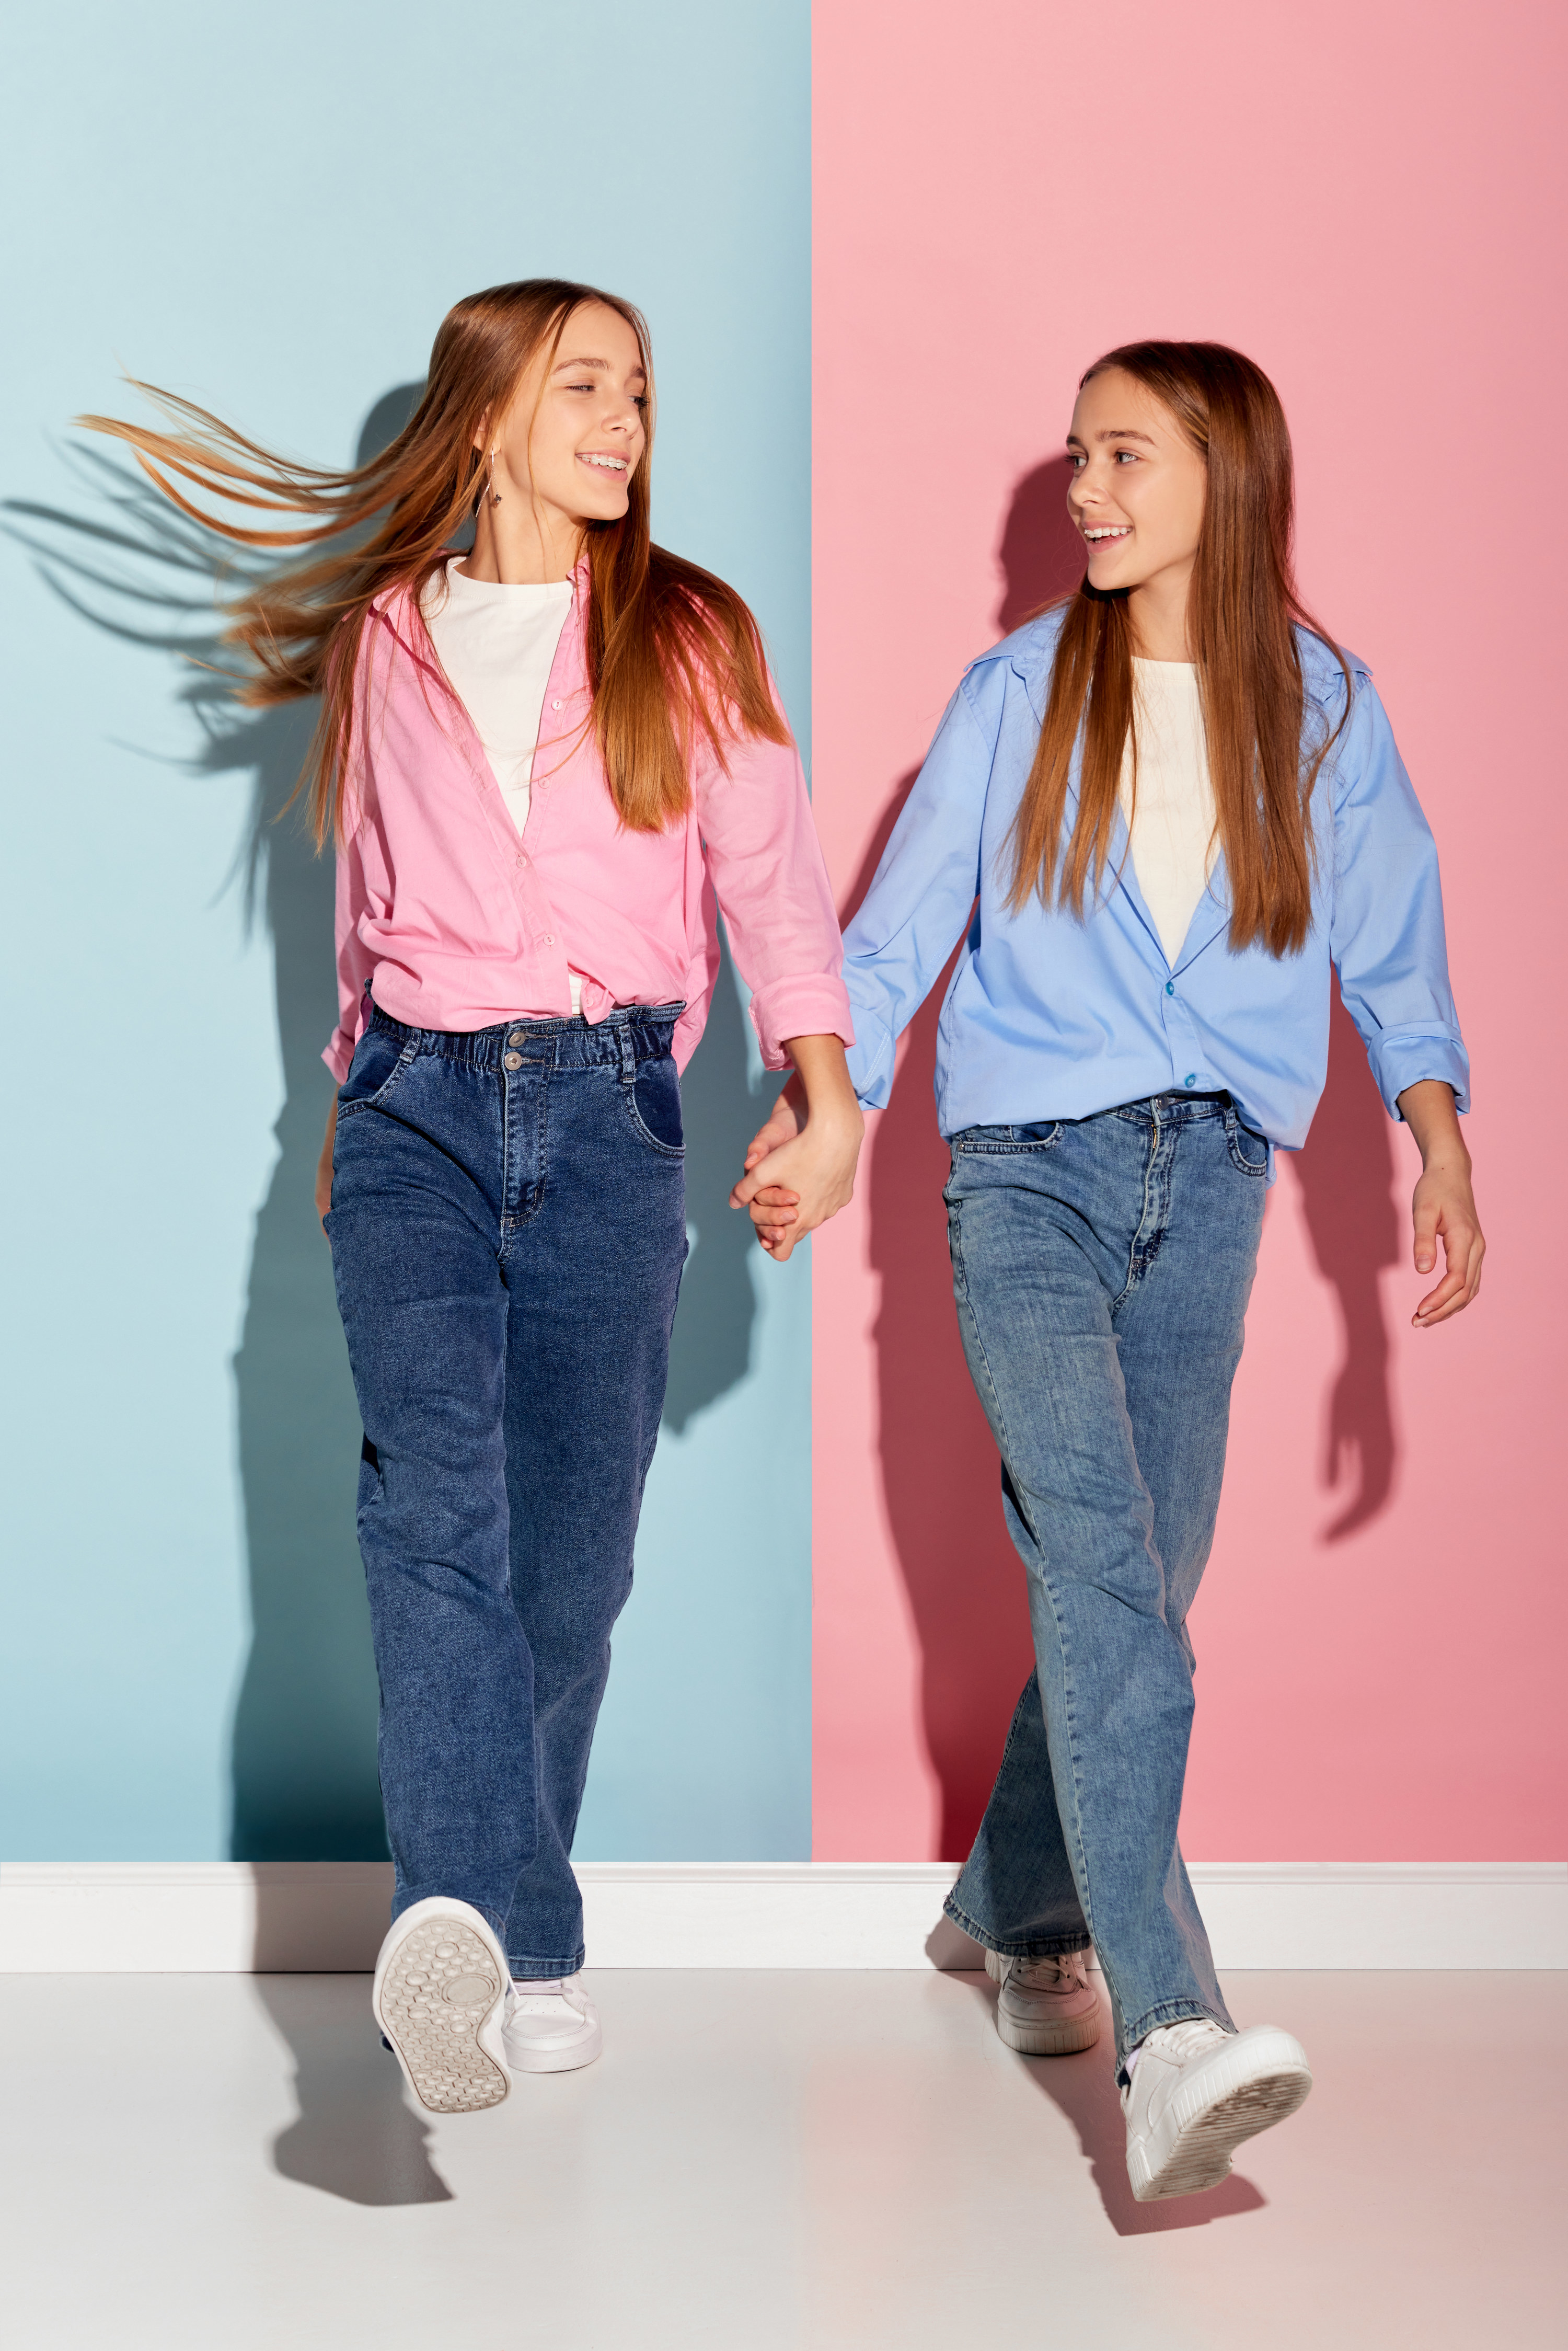 Stylish couple of teen girls in trendy warm clothes walking over colorful background.